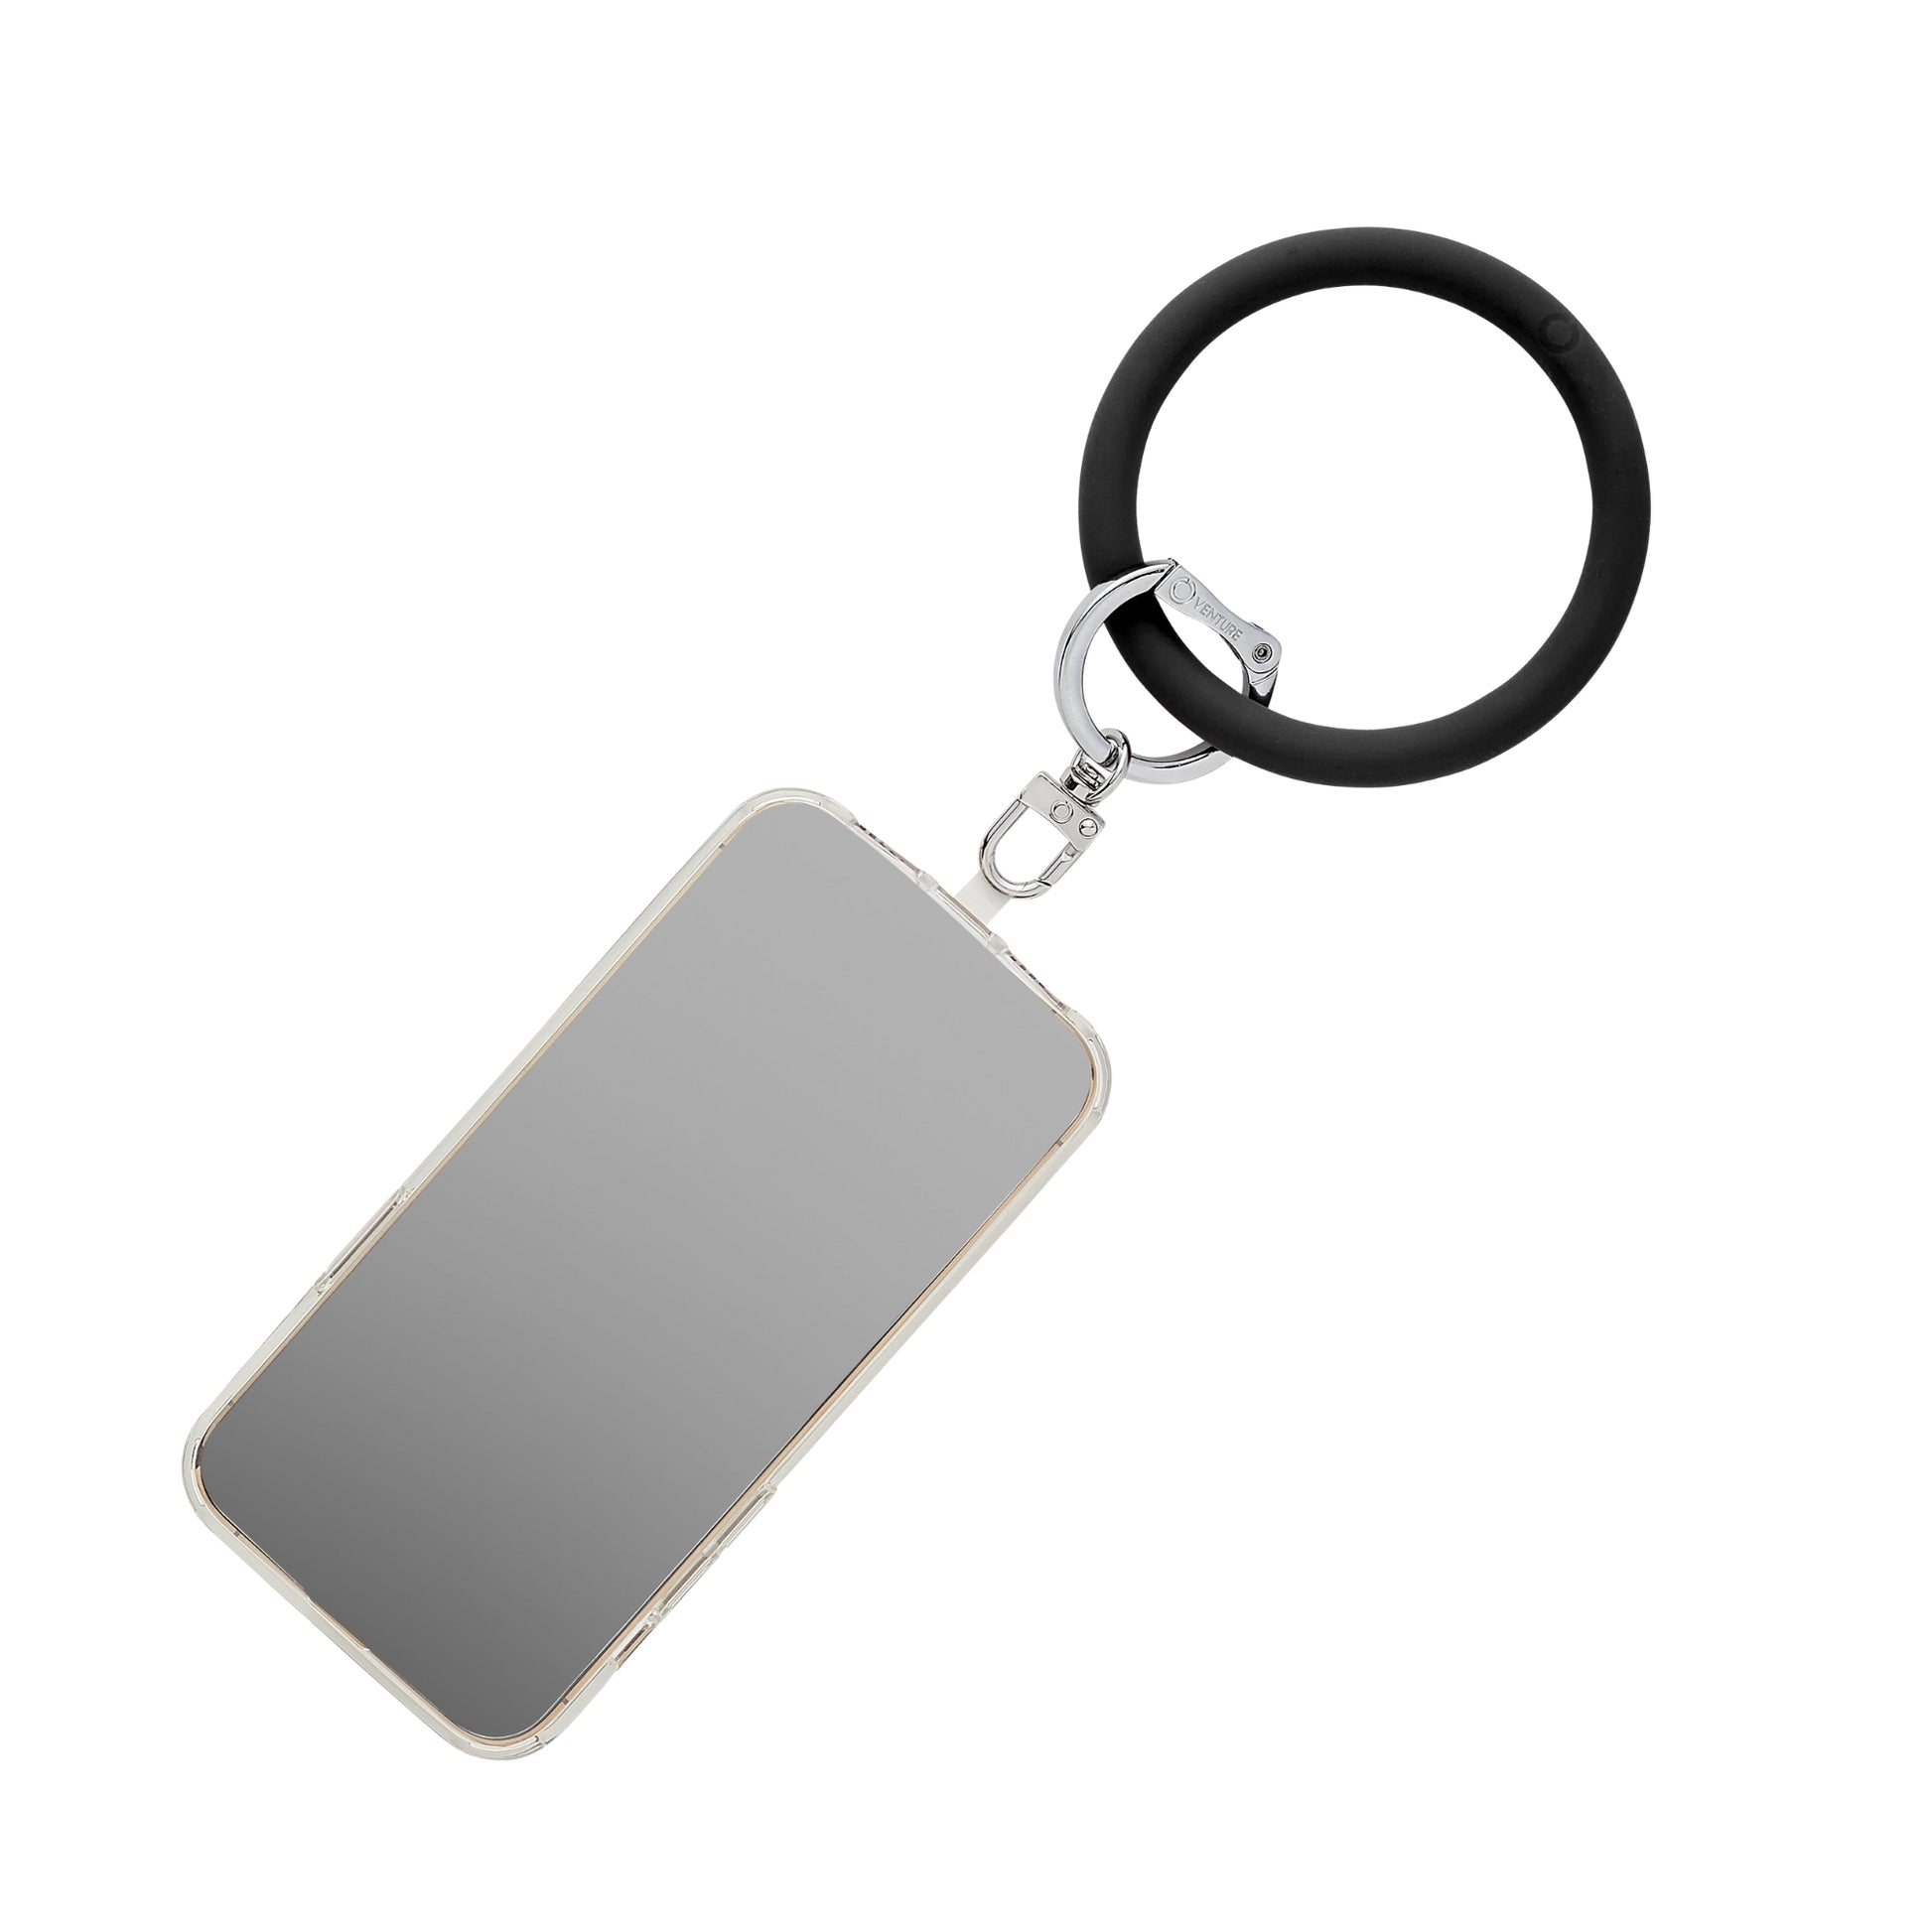 Back in Black Big O Key Ring and Phone Connector Oventure  Edit alt text